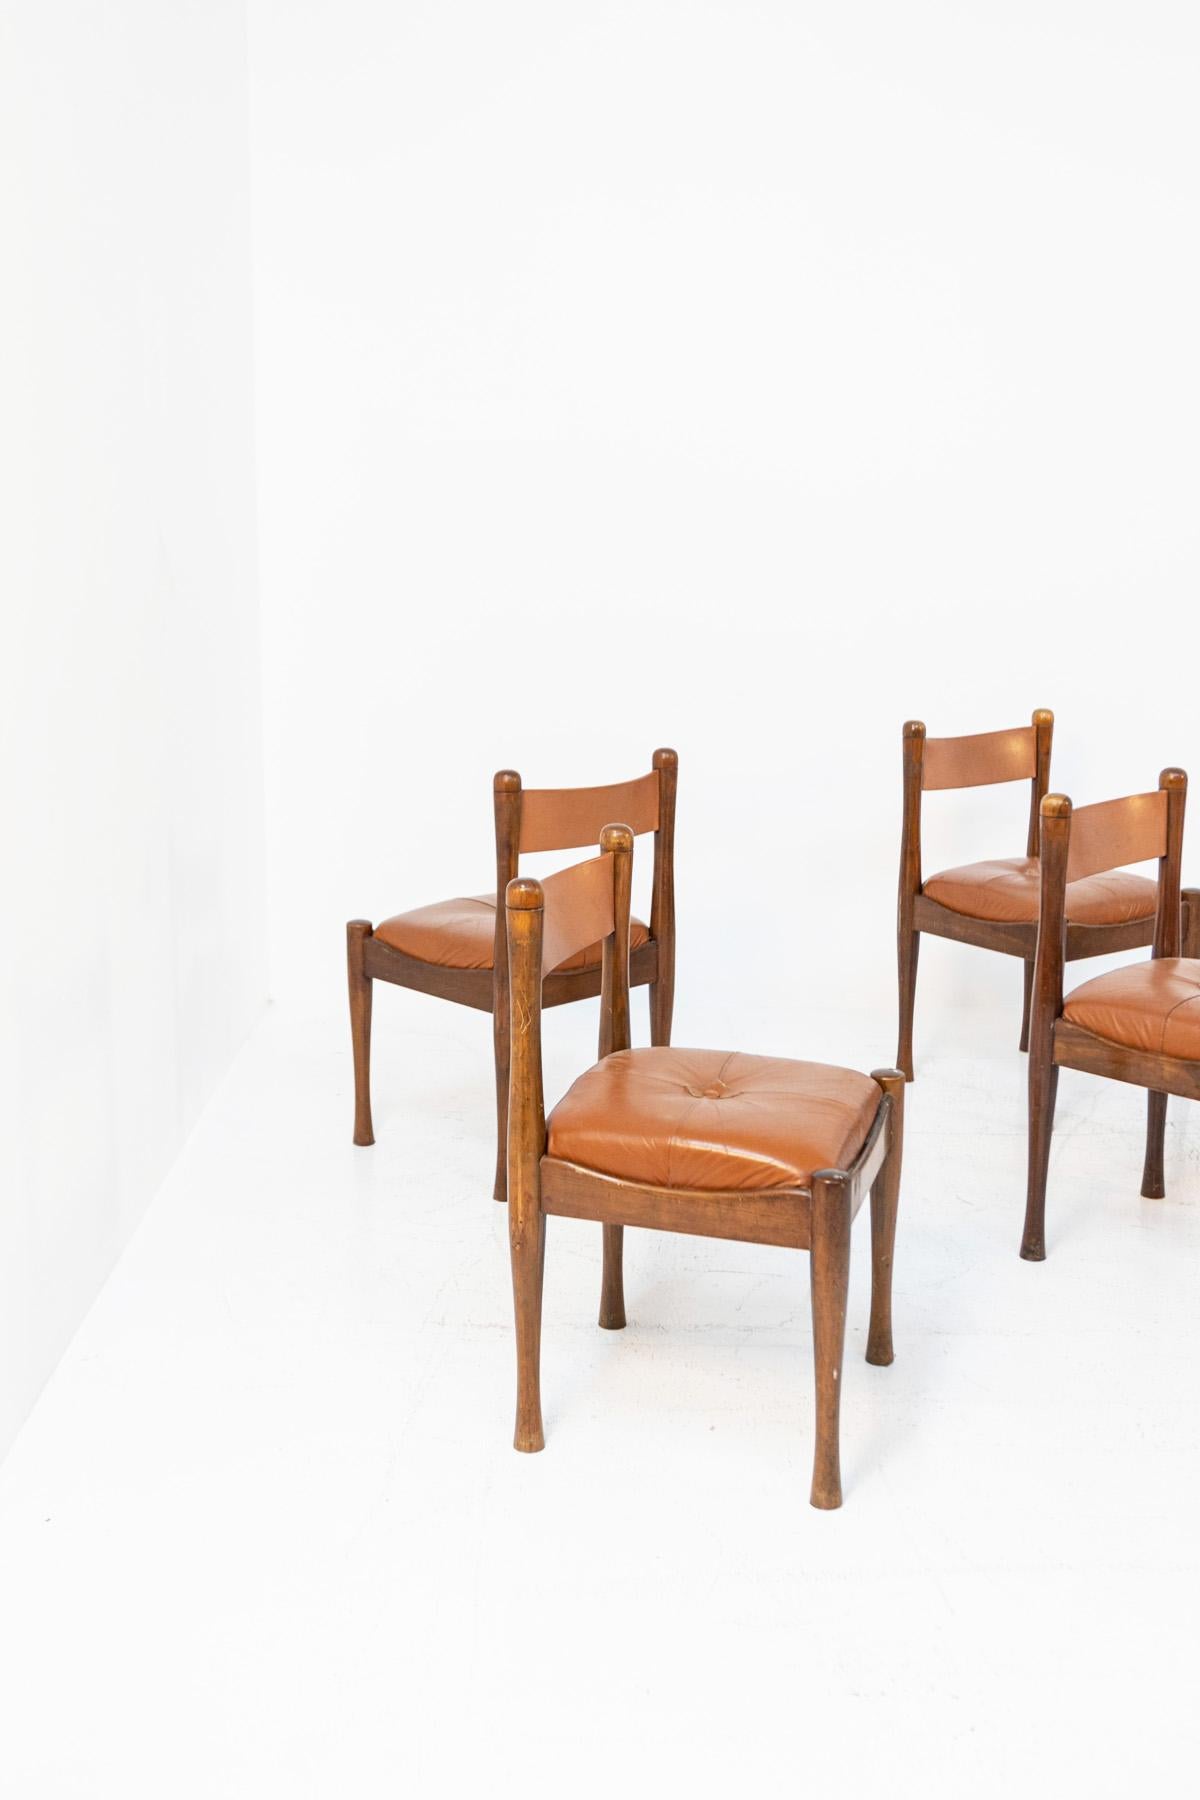 Silvio Coppola for Bernini Rare Set of Eight Chairs in Wood and Brown Leather 1